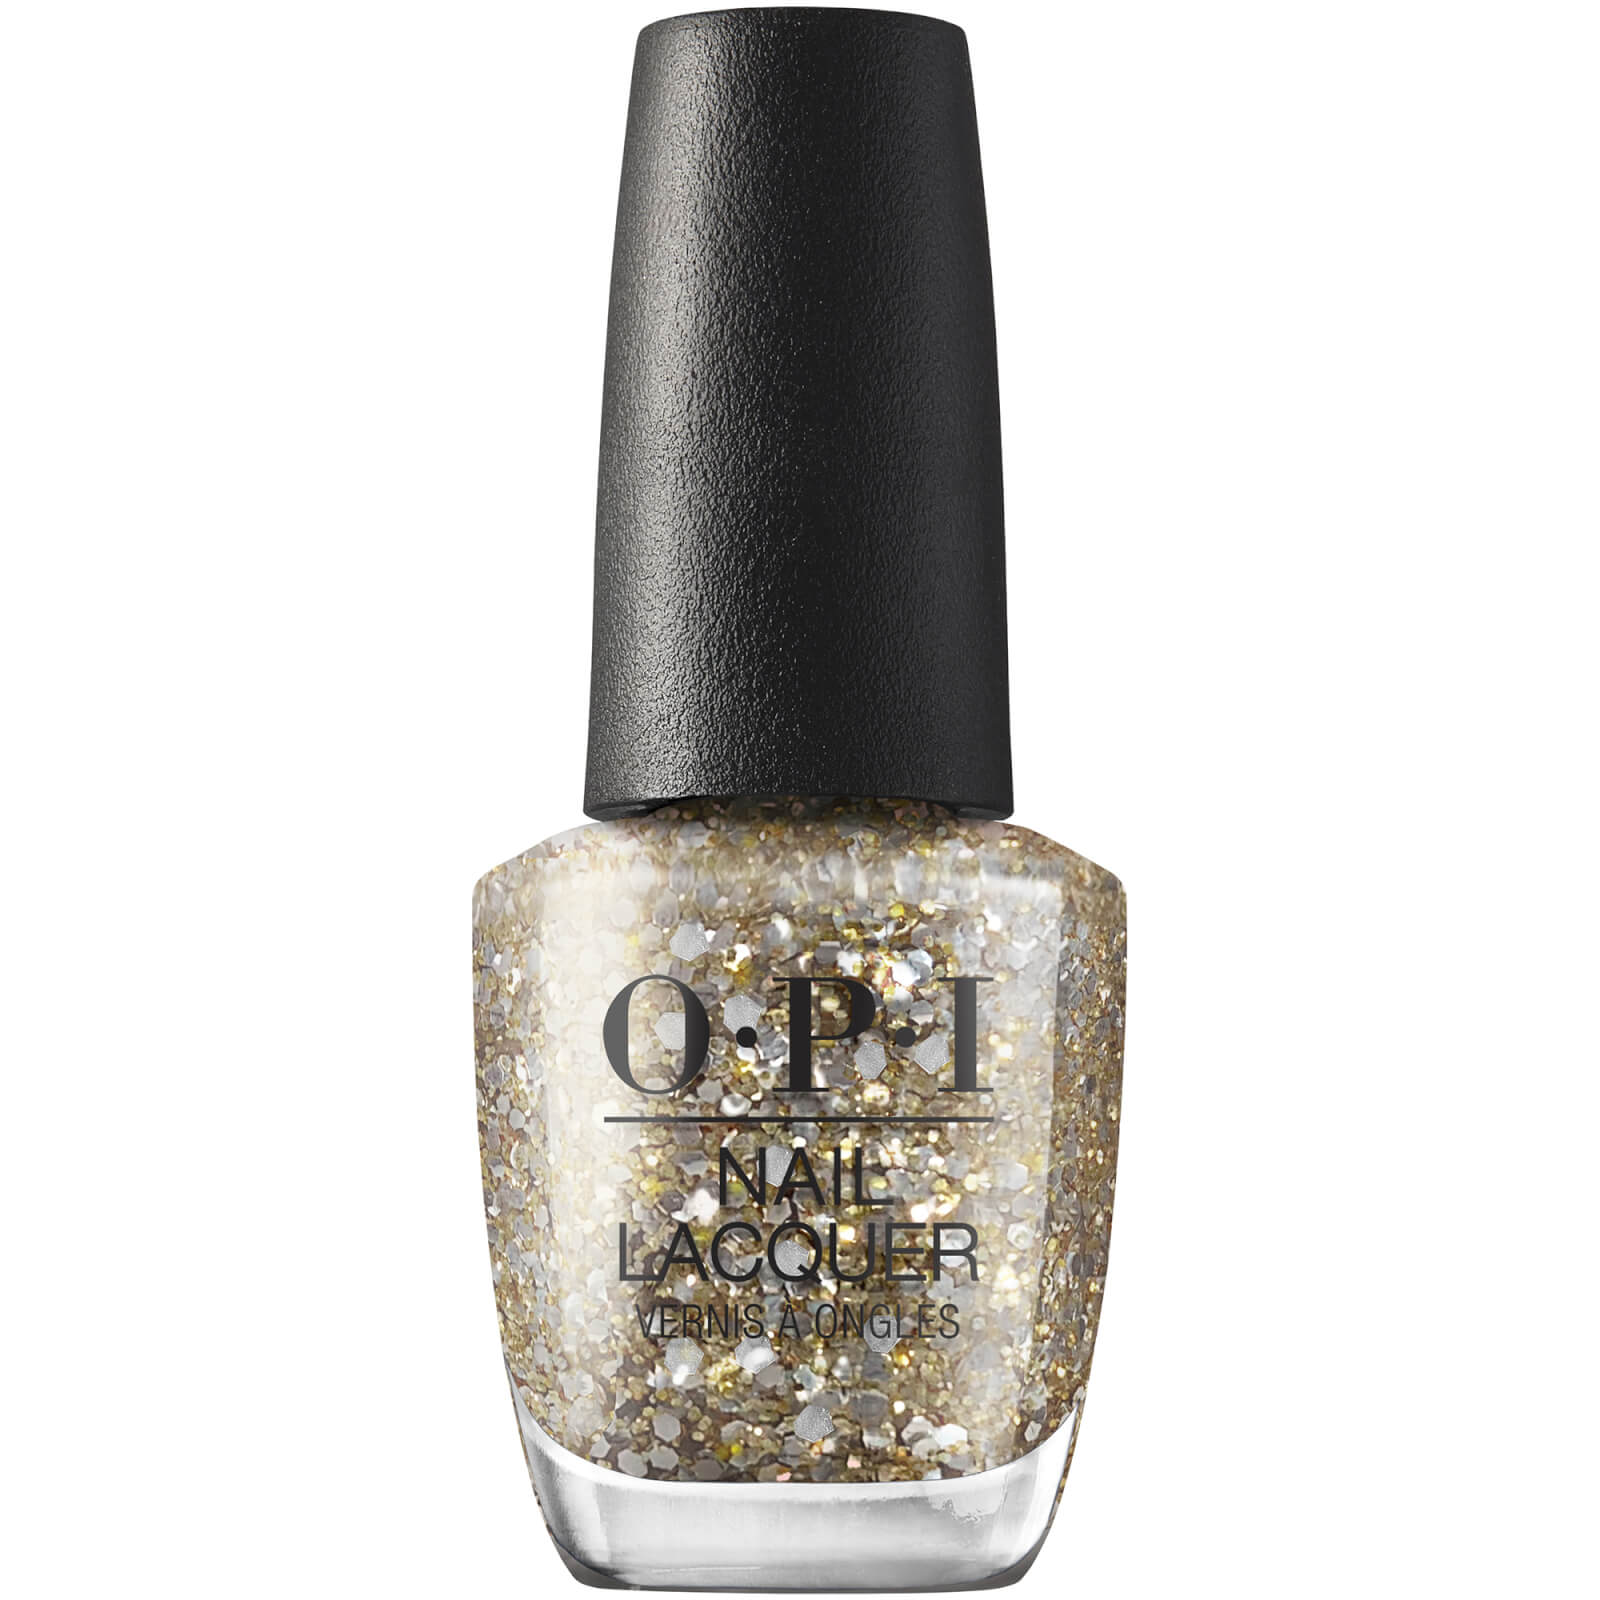 Opi Jewel Be Bold Collection Nail Lacquer 15ml (various Shades) - Pop The Baubles